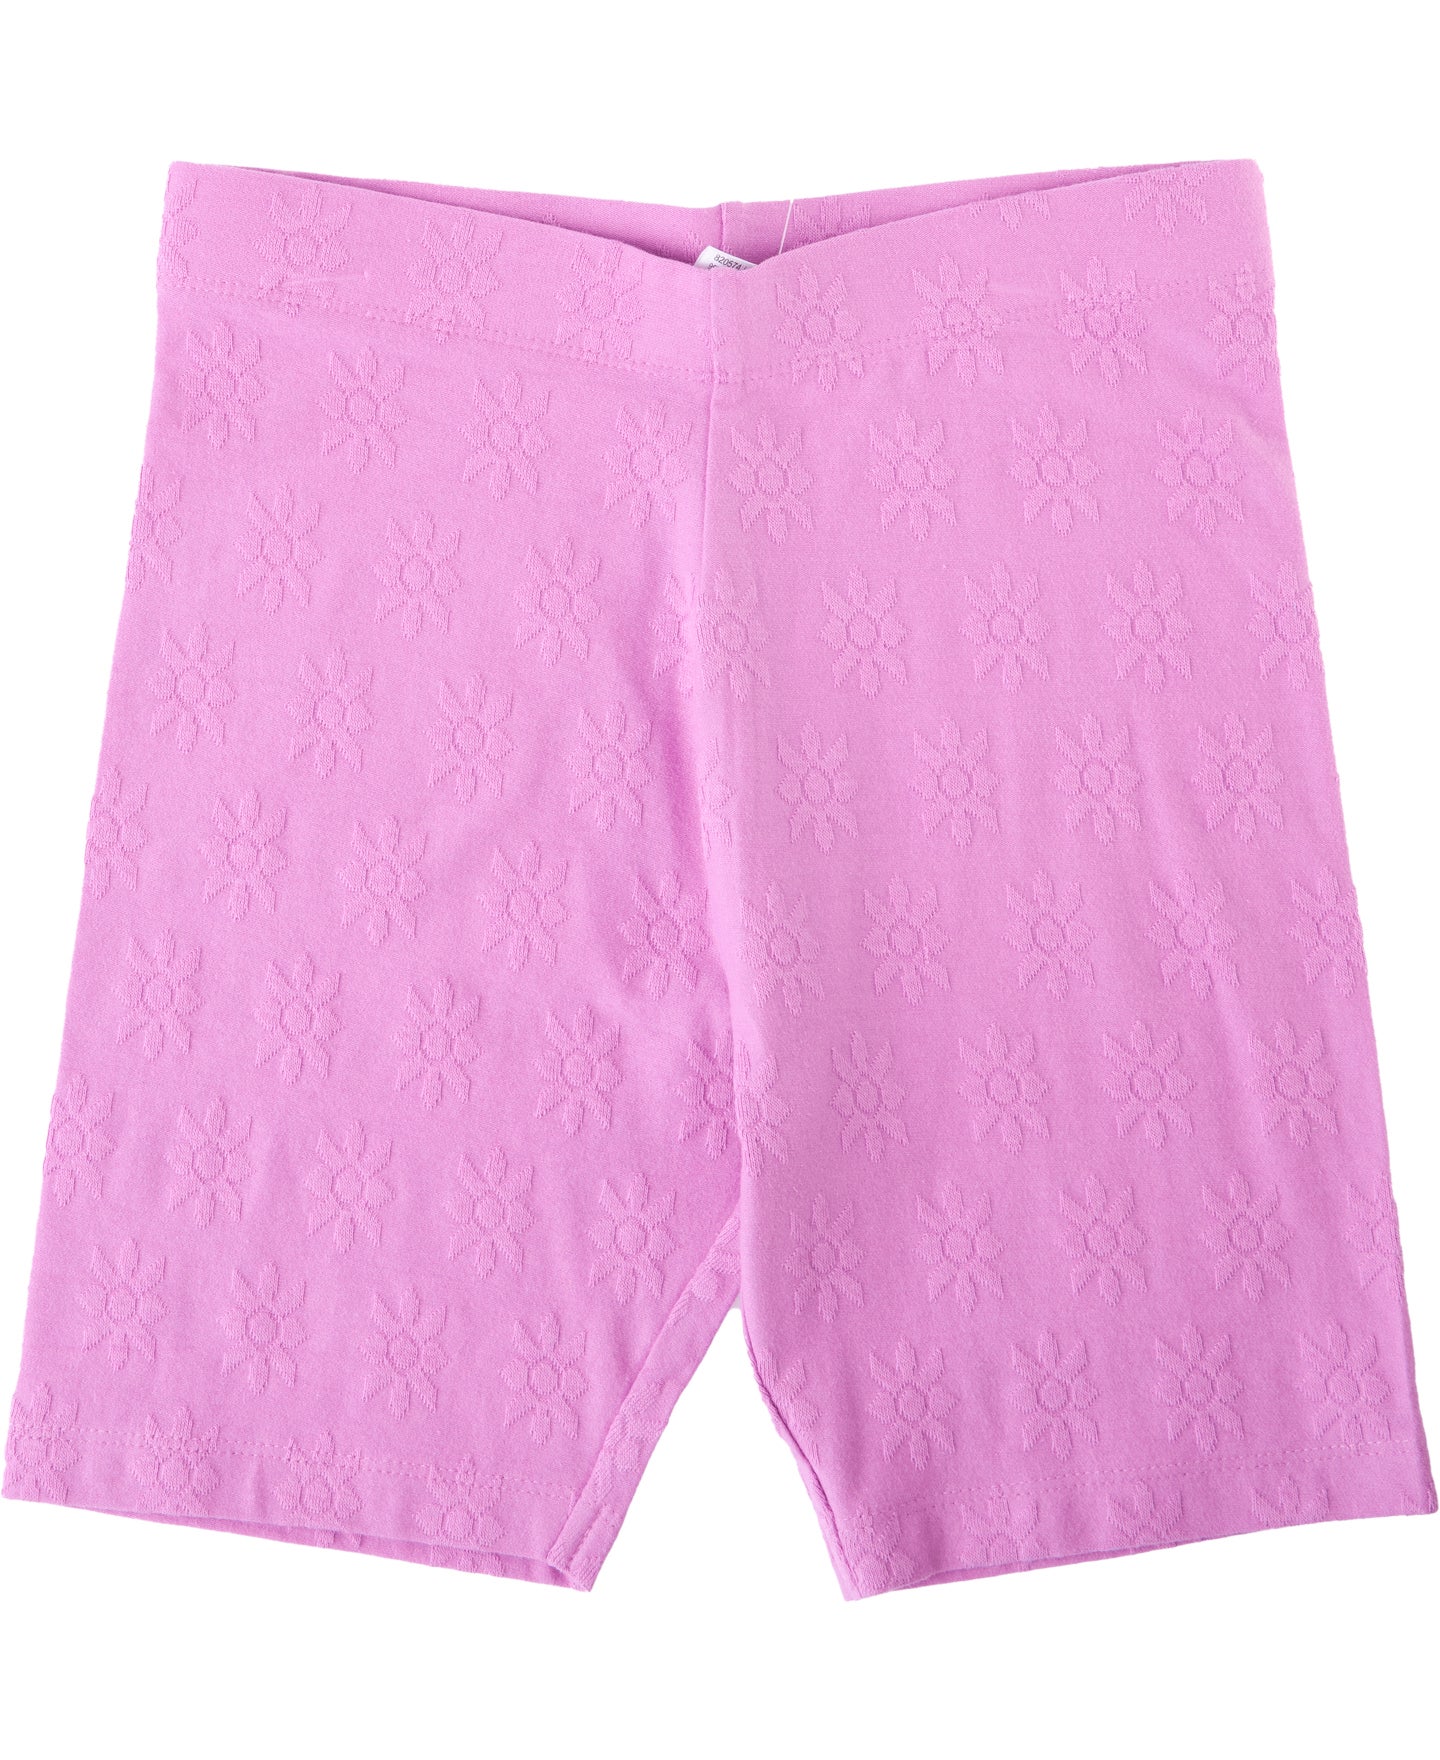 https://www.postie.co.nz/content/products/kids-floral-jacquard-bike-shorts-violet-a-outfit-820574.jpg